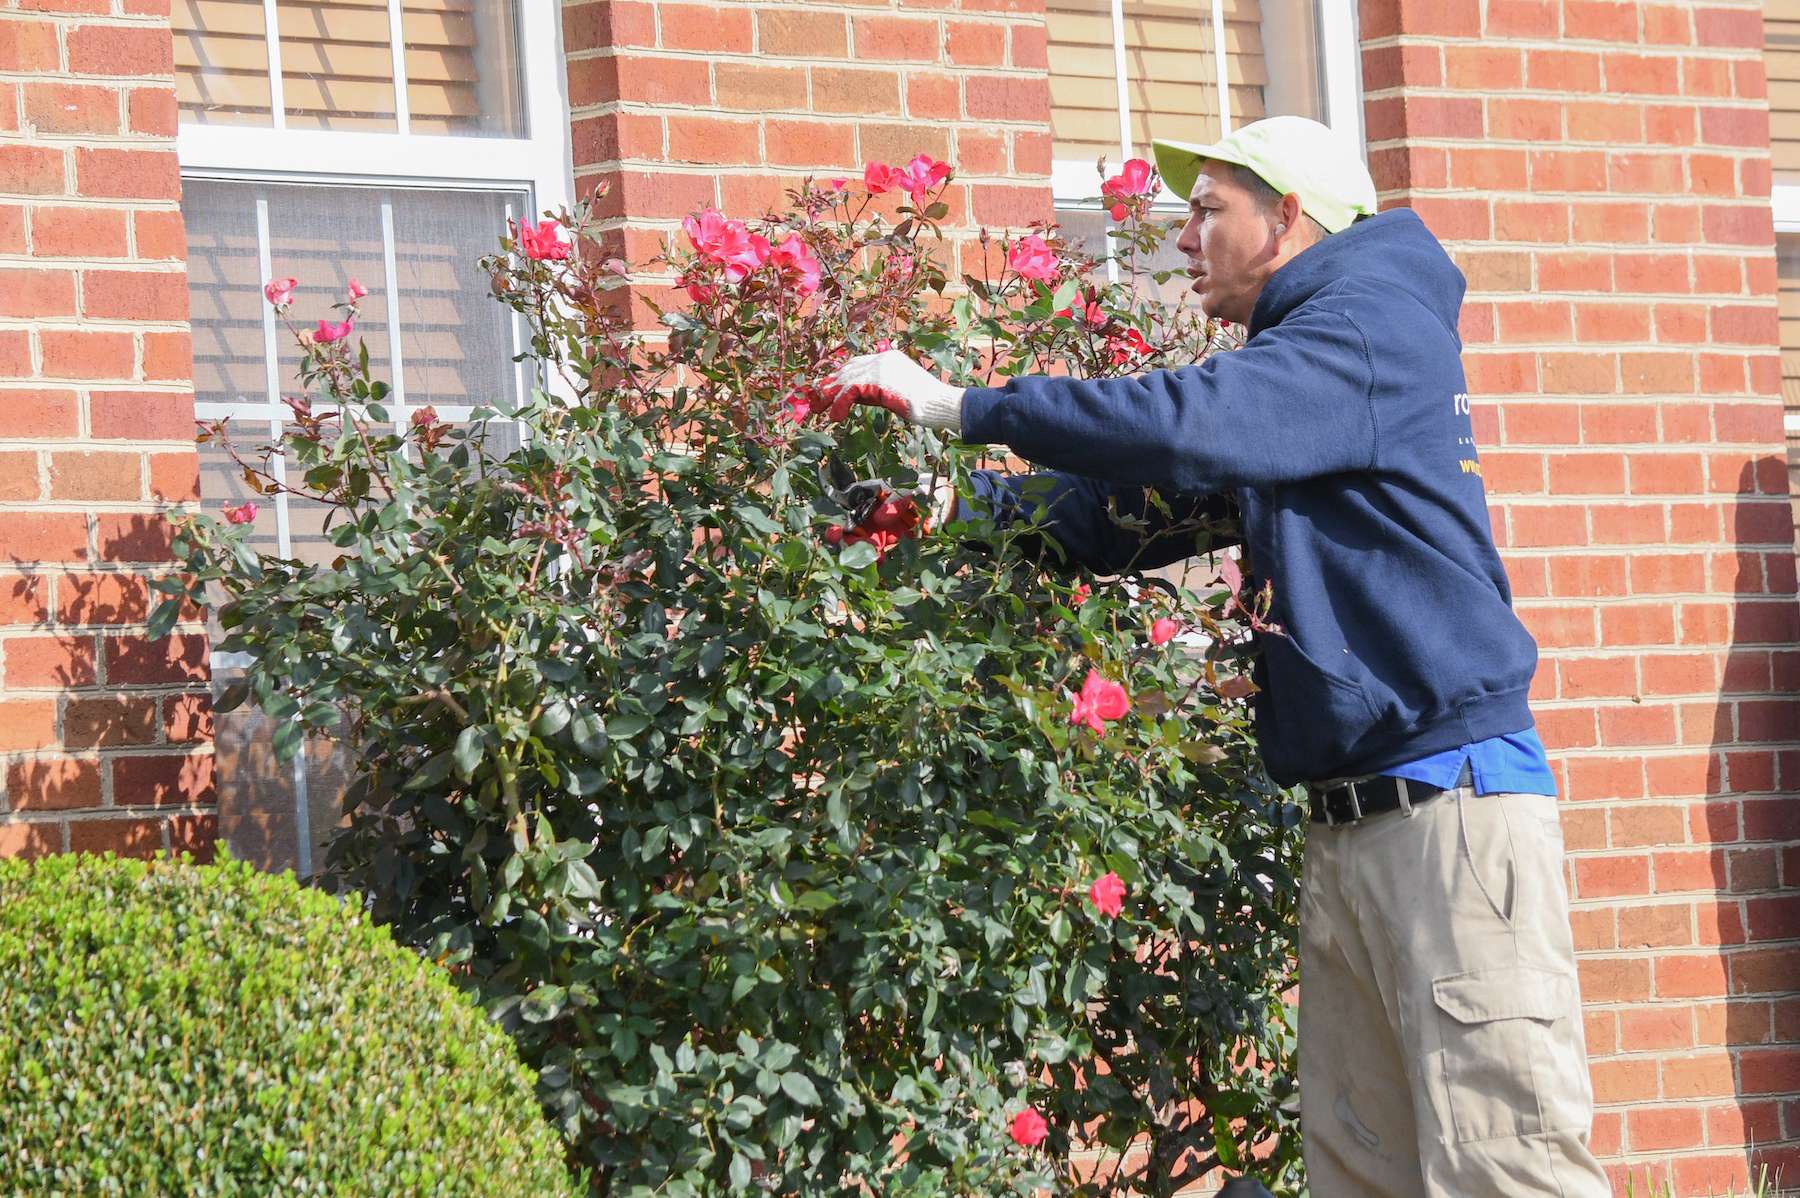 6 Common Questions About Pruning Ornamental Trees & Shrubs